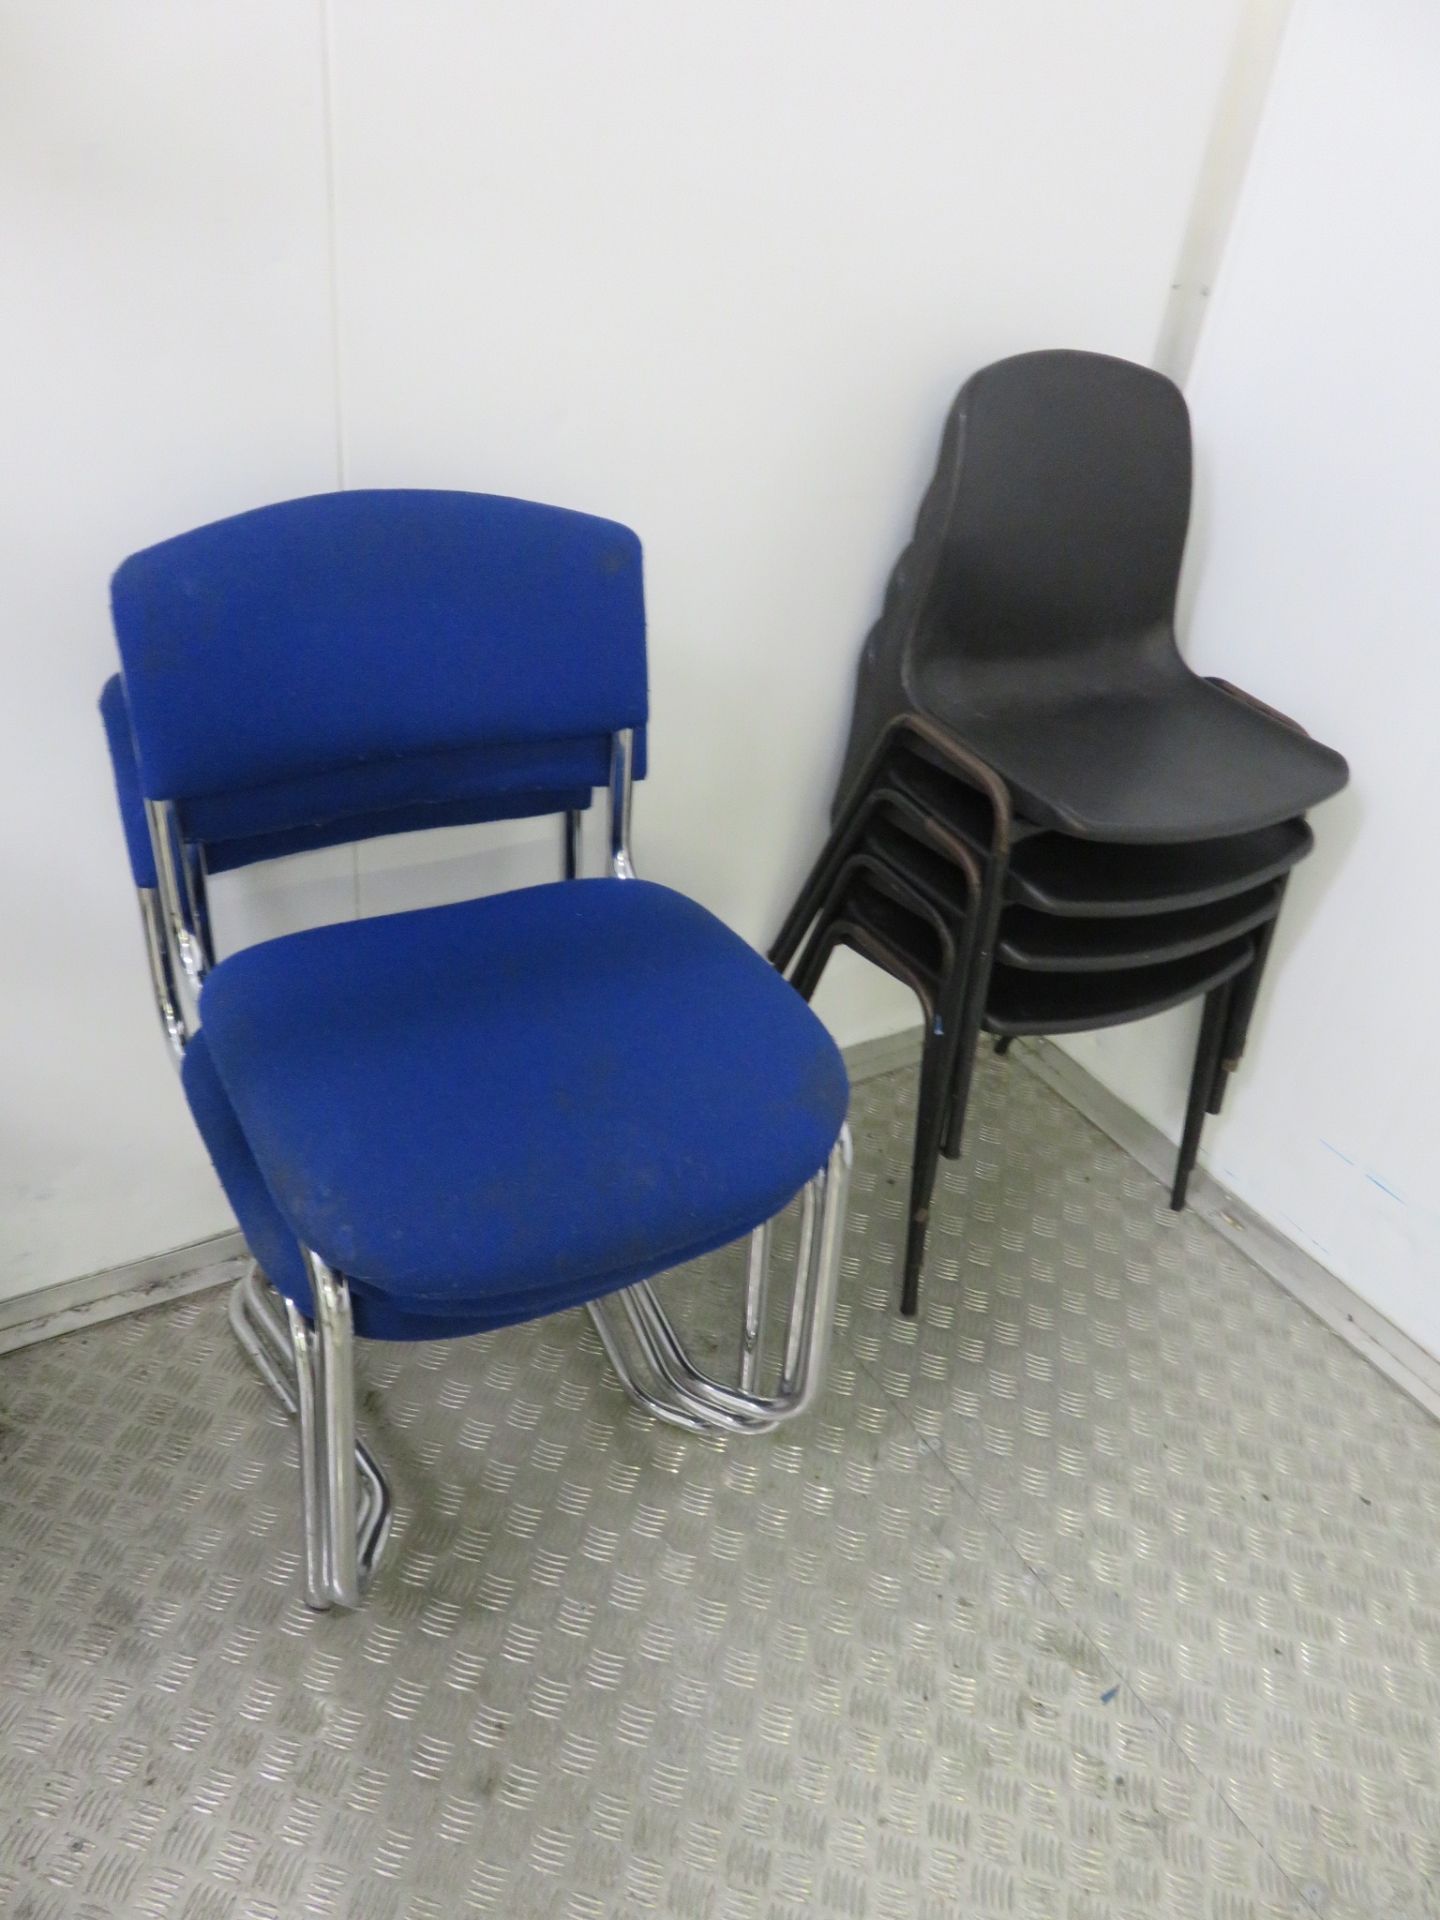 11 x Green Chairs; 10 x blue Chairs; 4 x black chairs. LO £15 - Image 4 of 4